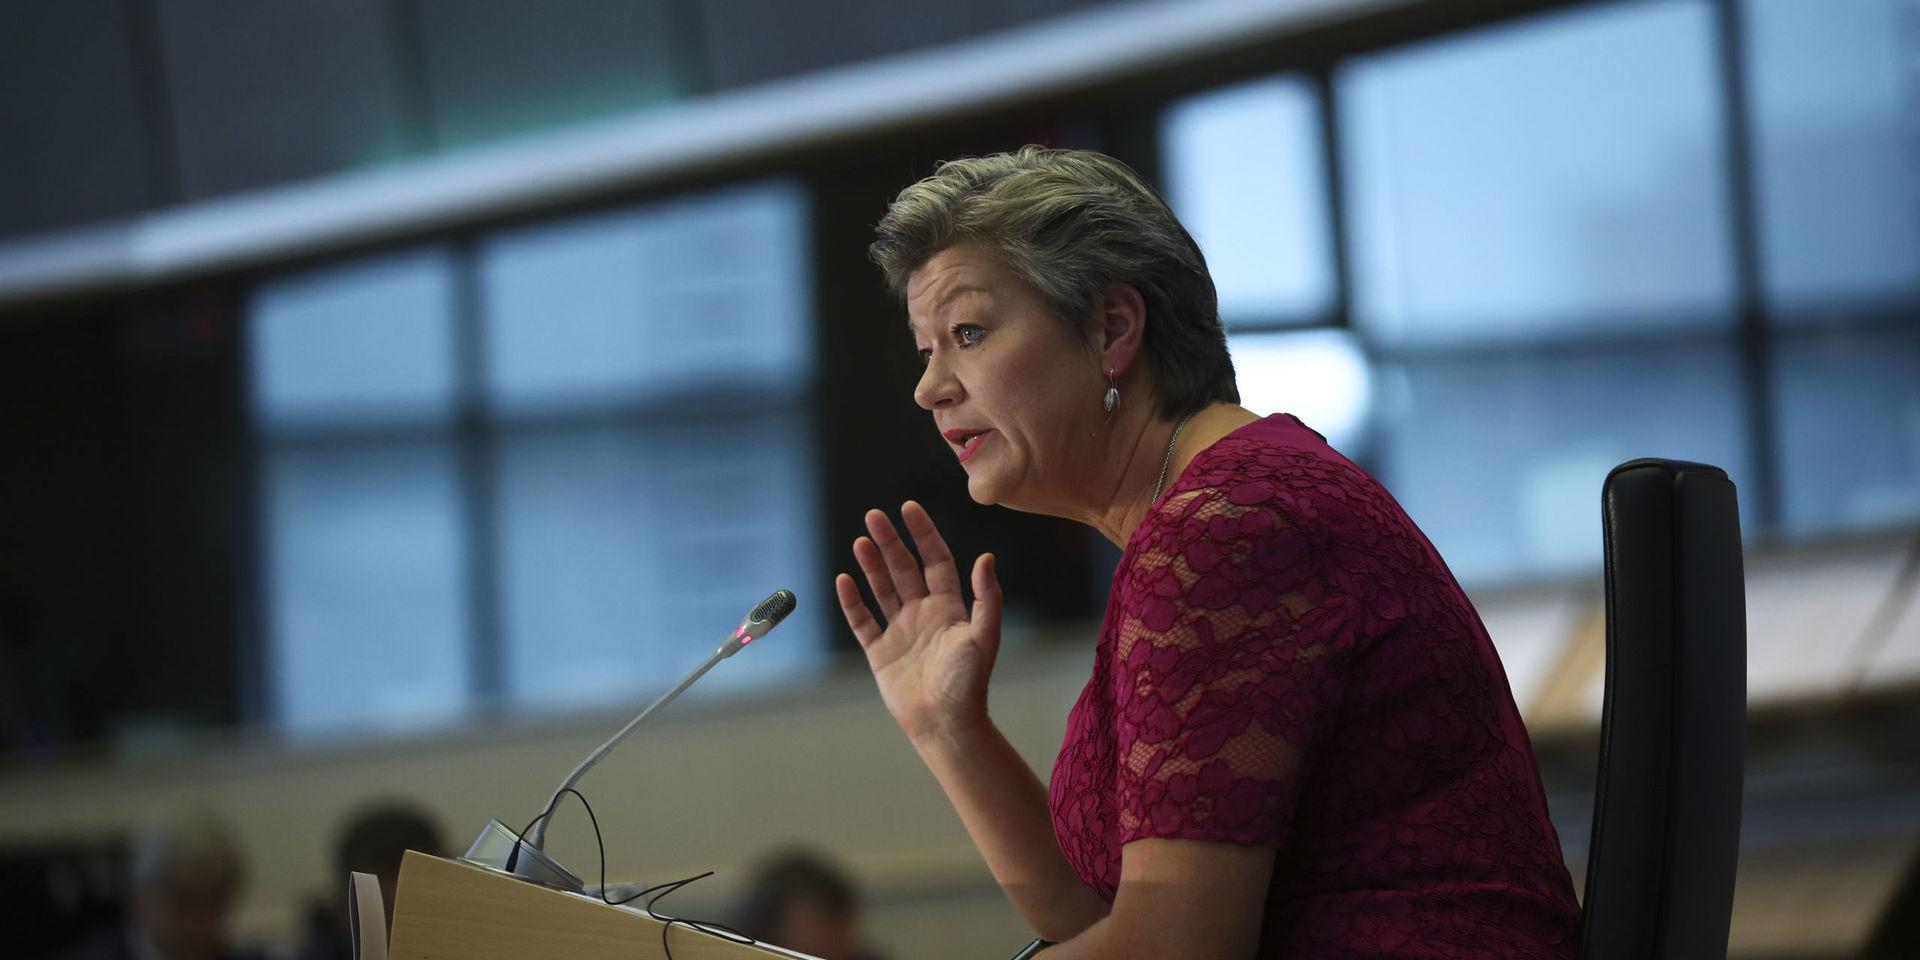 European Commissioner designate for Home Affairs Ylva Johansson answers questions during her hearing at the European Parliament in Brussels, Tuesday, Oct. 1, 2019. (AP Photo/Francisco Seco)  FS130